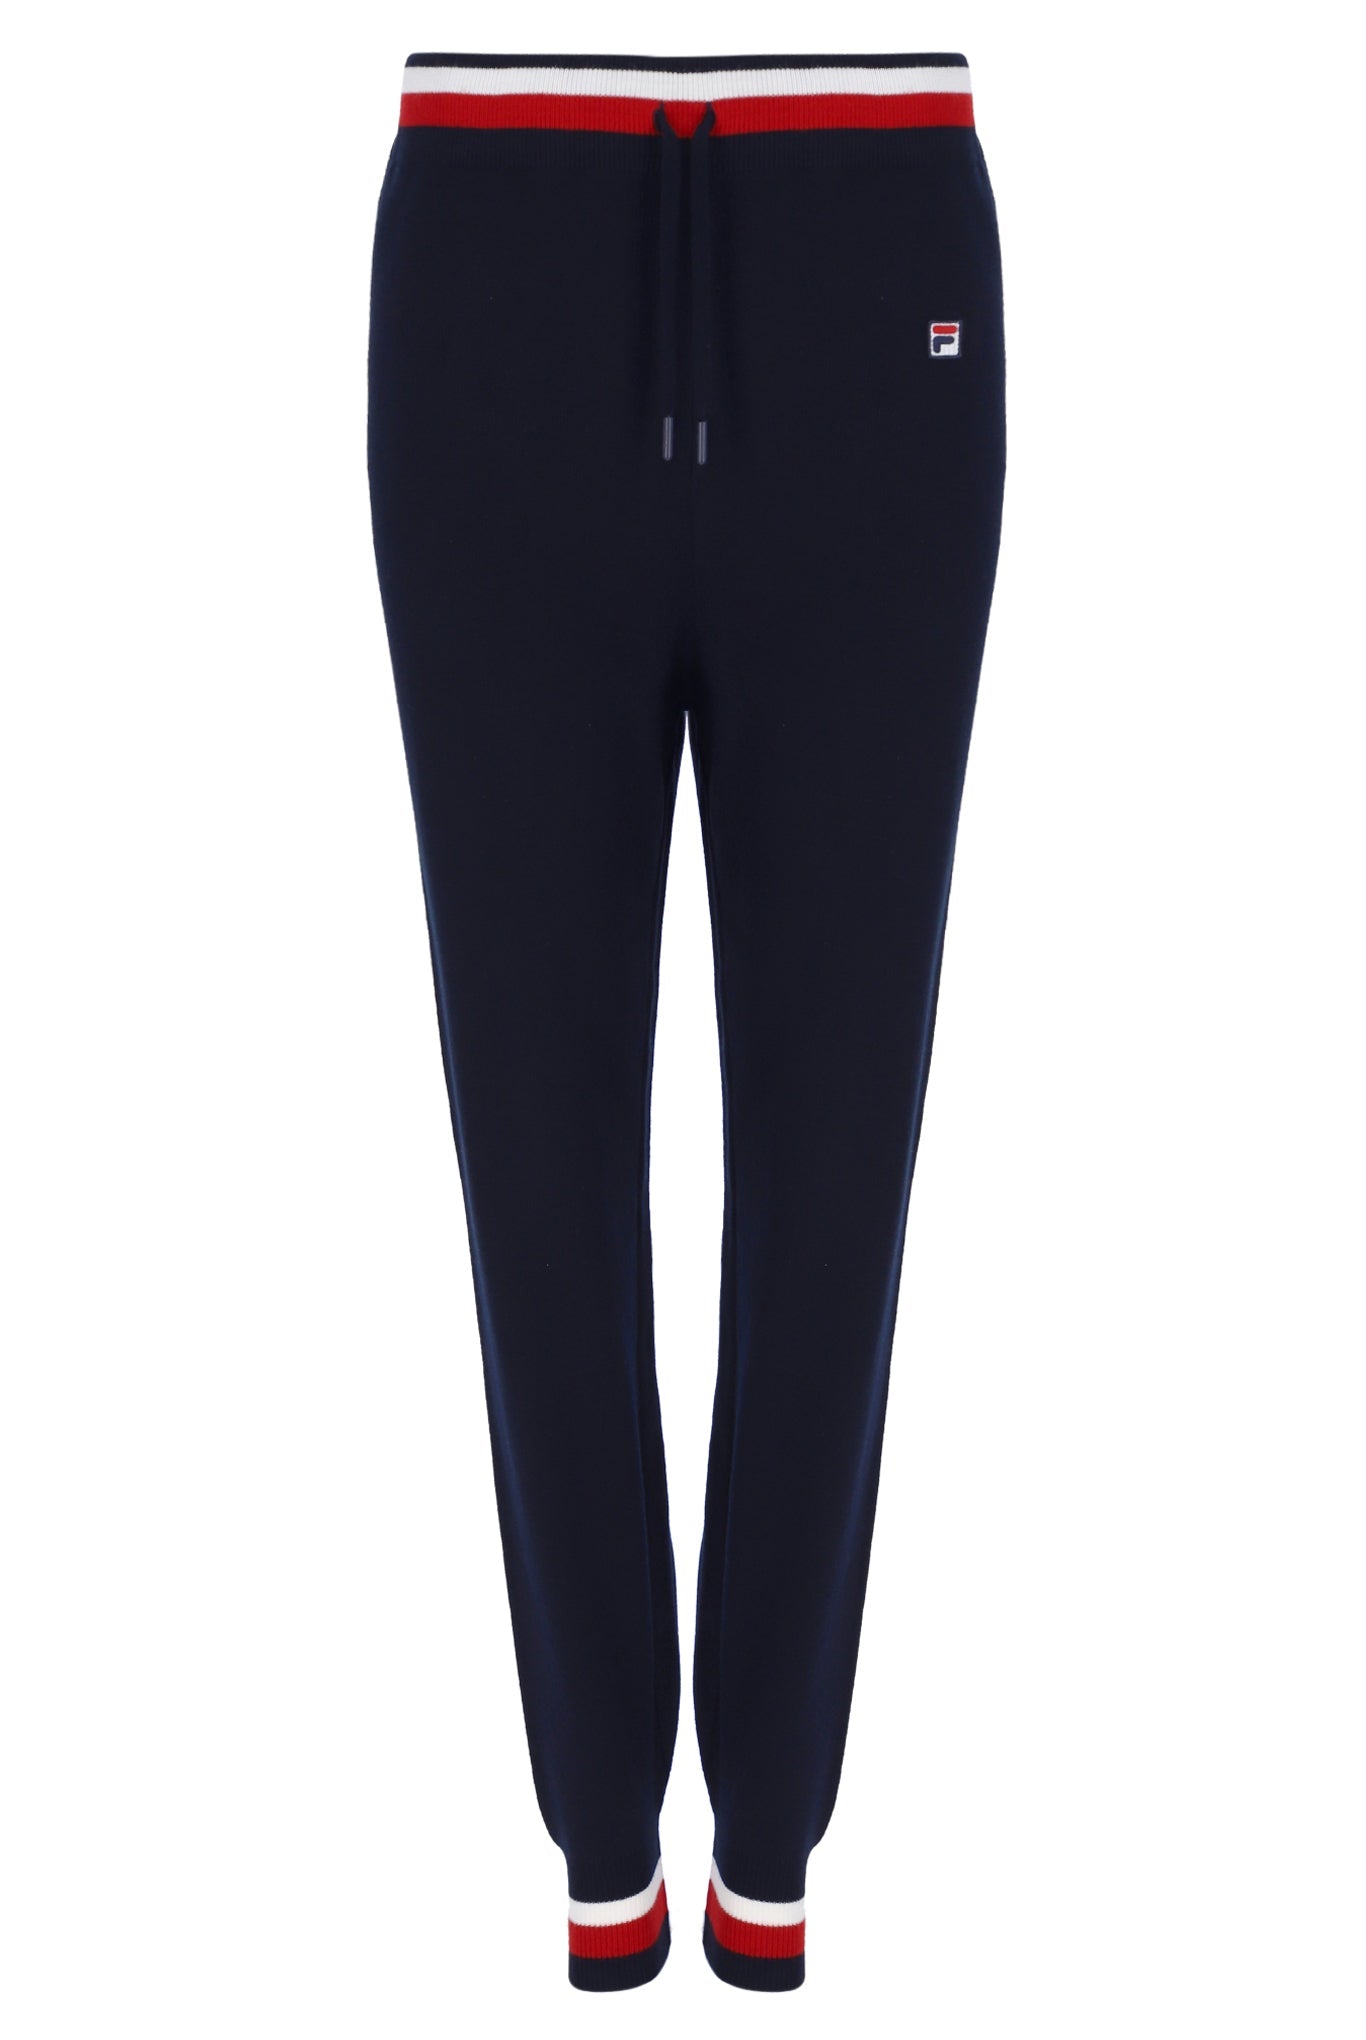 Ladies Frankie Navy/Red/White Knit Pant-Ghost Front View